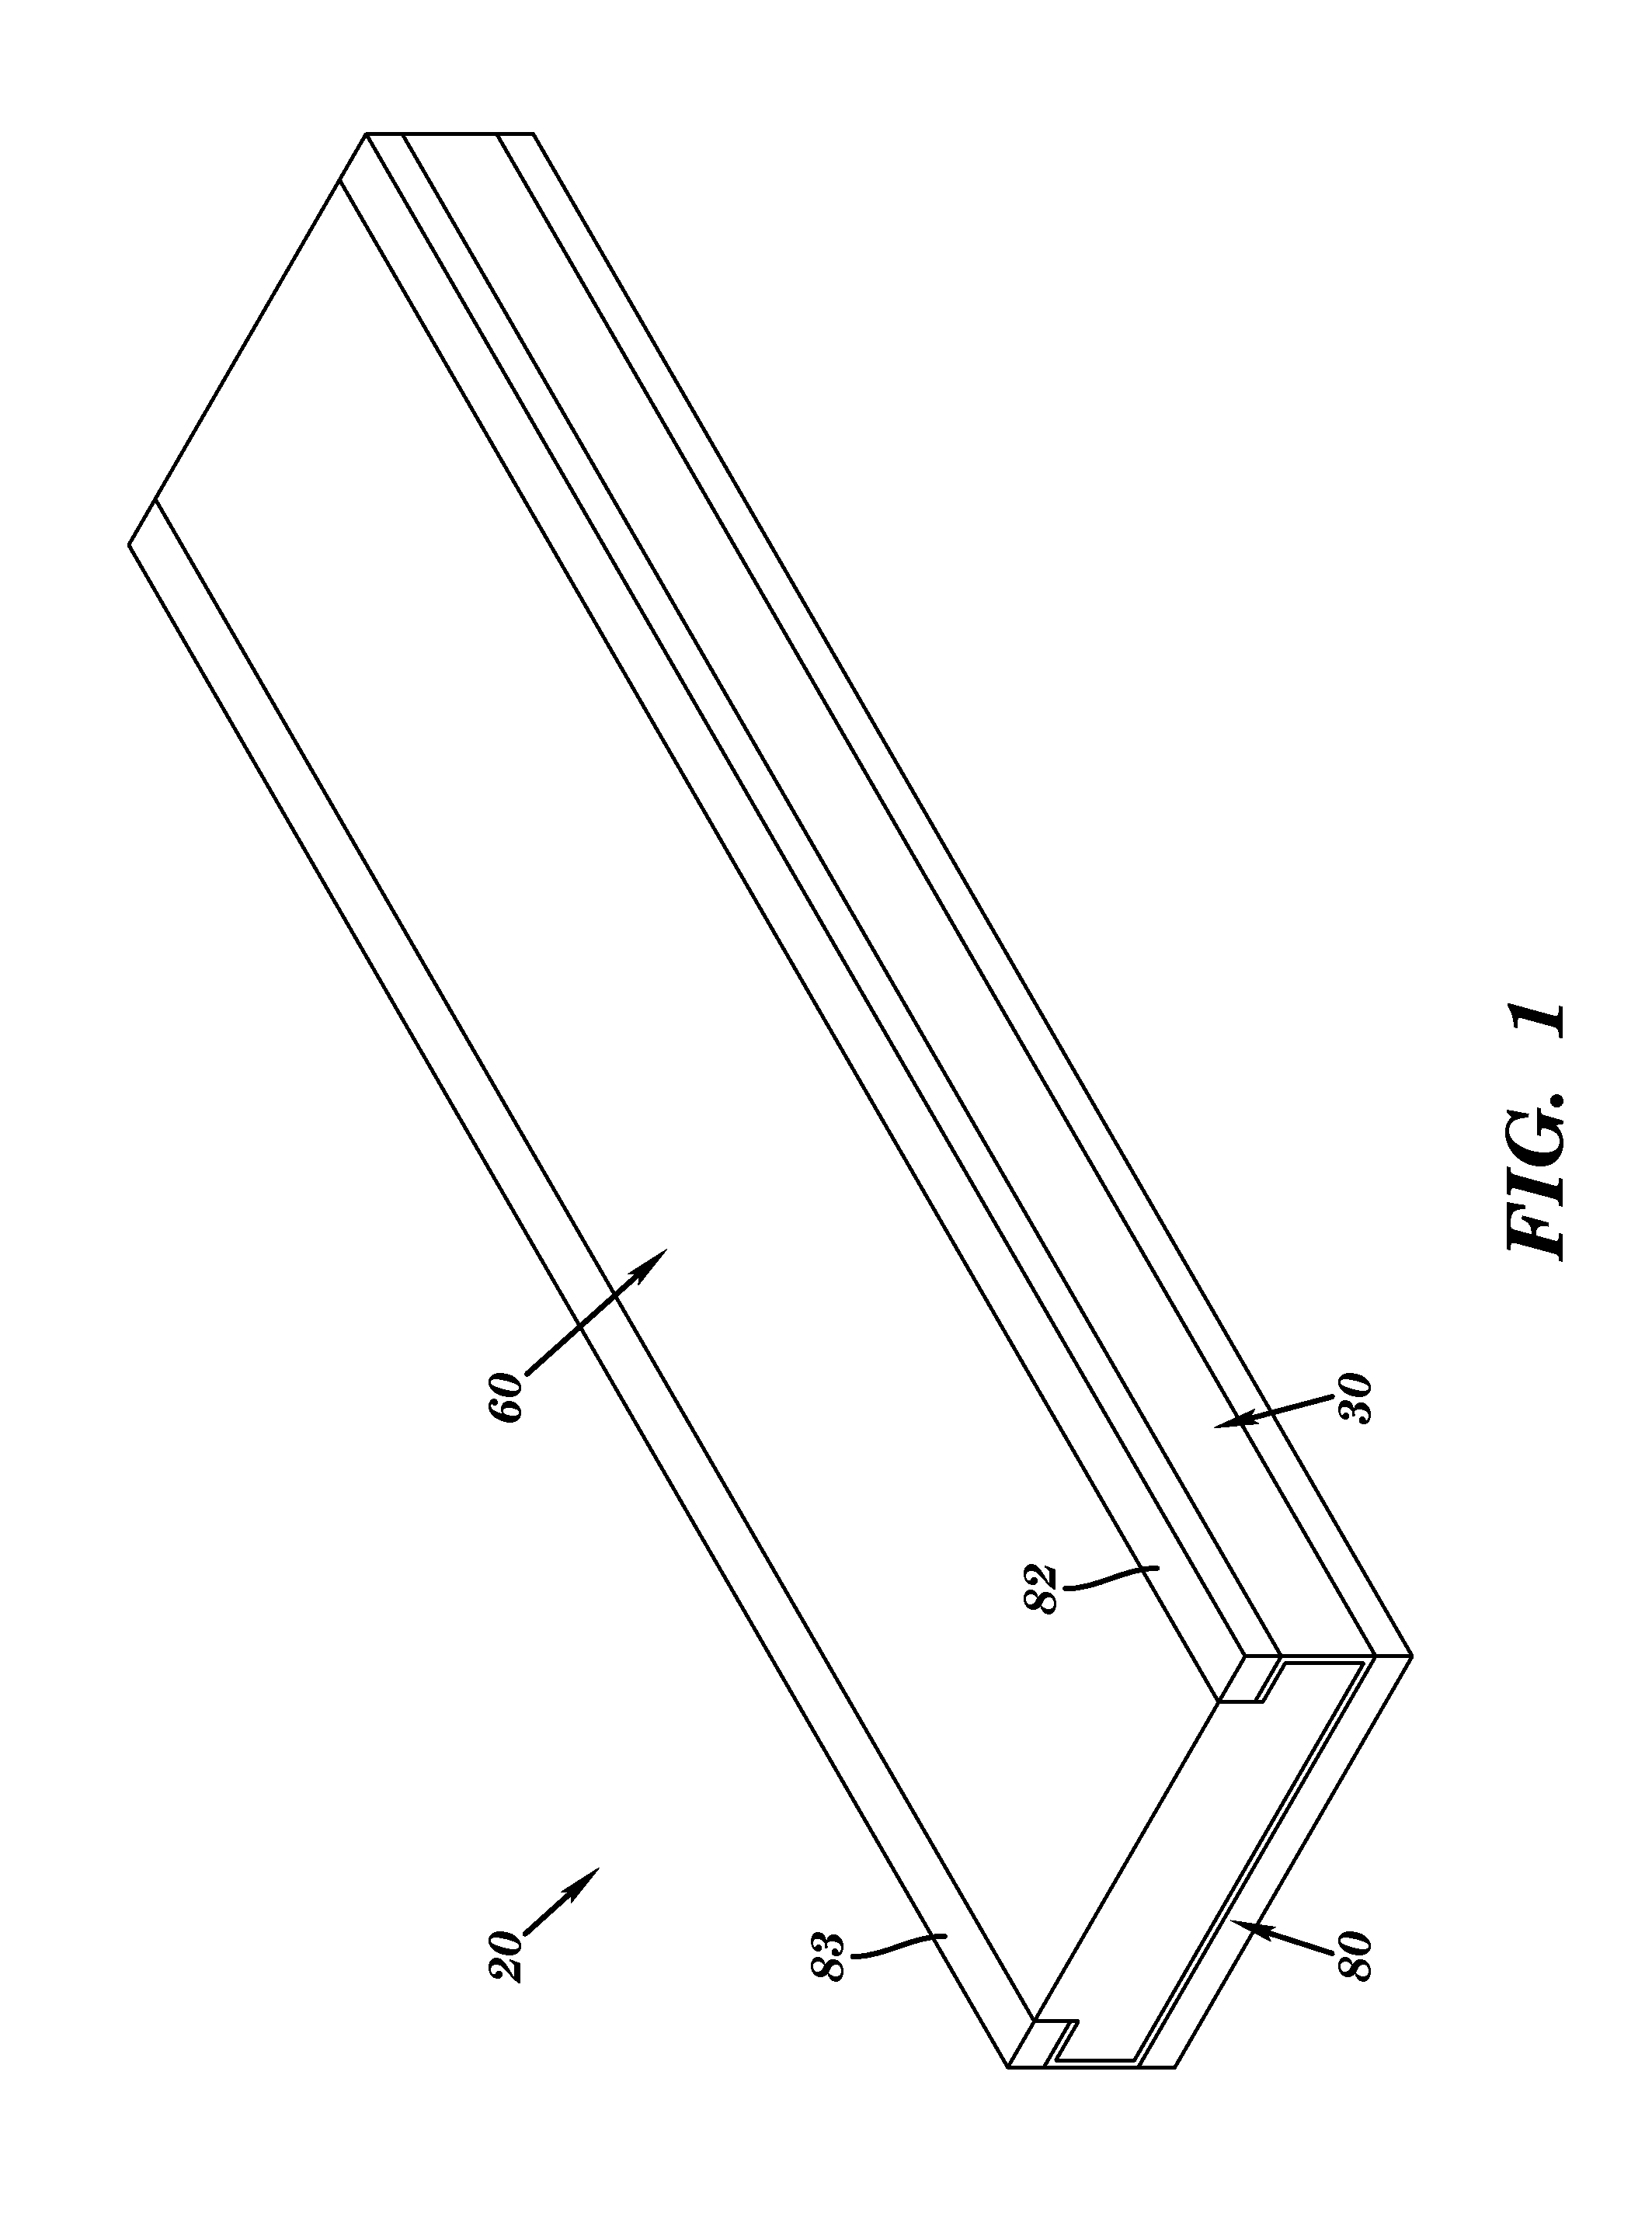 Triple/long jump take-off board systems and methods for forming the same